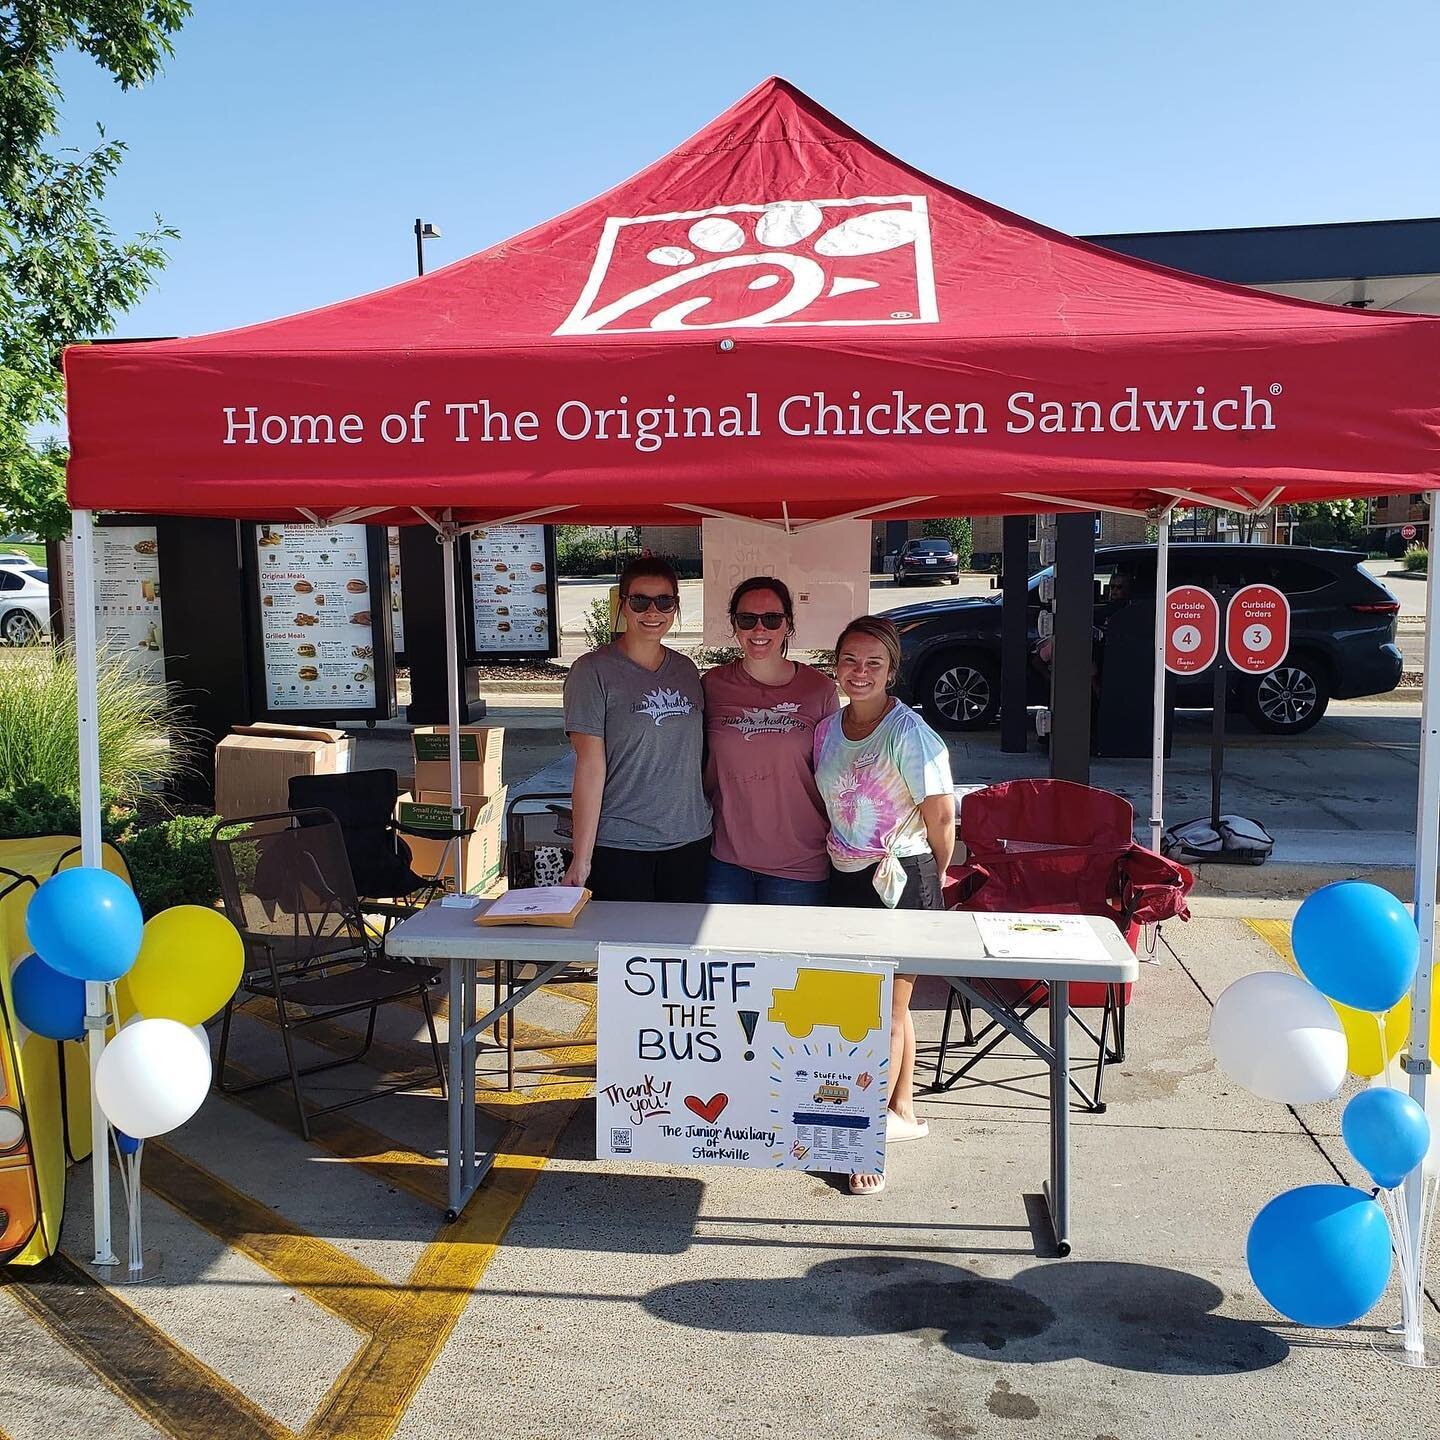 Thanks to everyone who donated to Stuff the Bus this weekend at Chick-Fil-A!! 
We are excited for our second round of collection this weekend. We will be at Kroger, Chick-Fil-A, and Wal Mart from 9am-1pm. Come see us and help us provide as much schoo